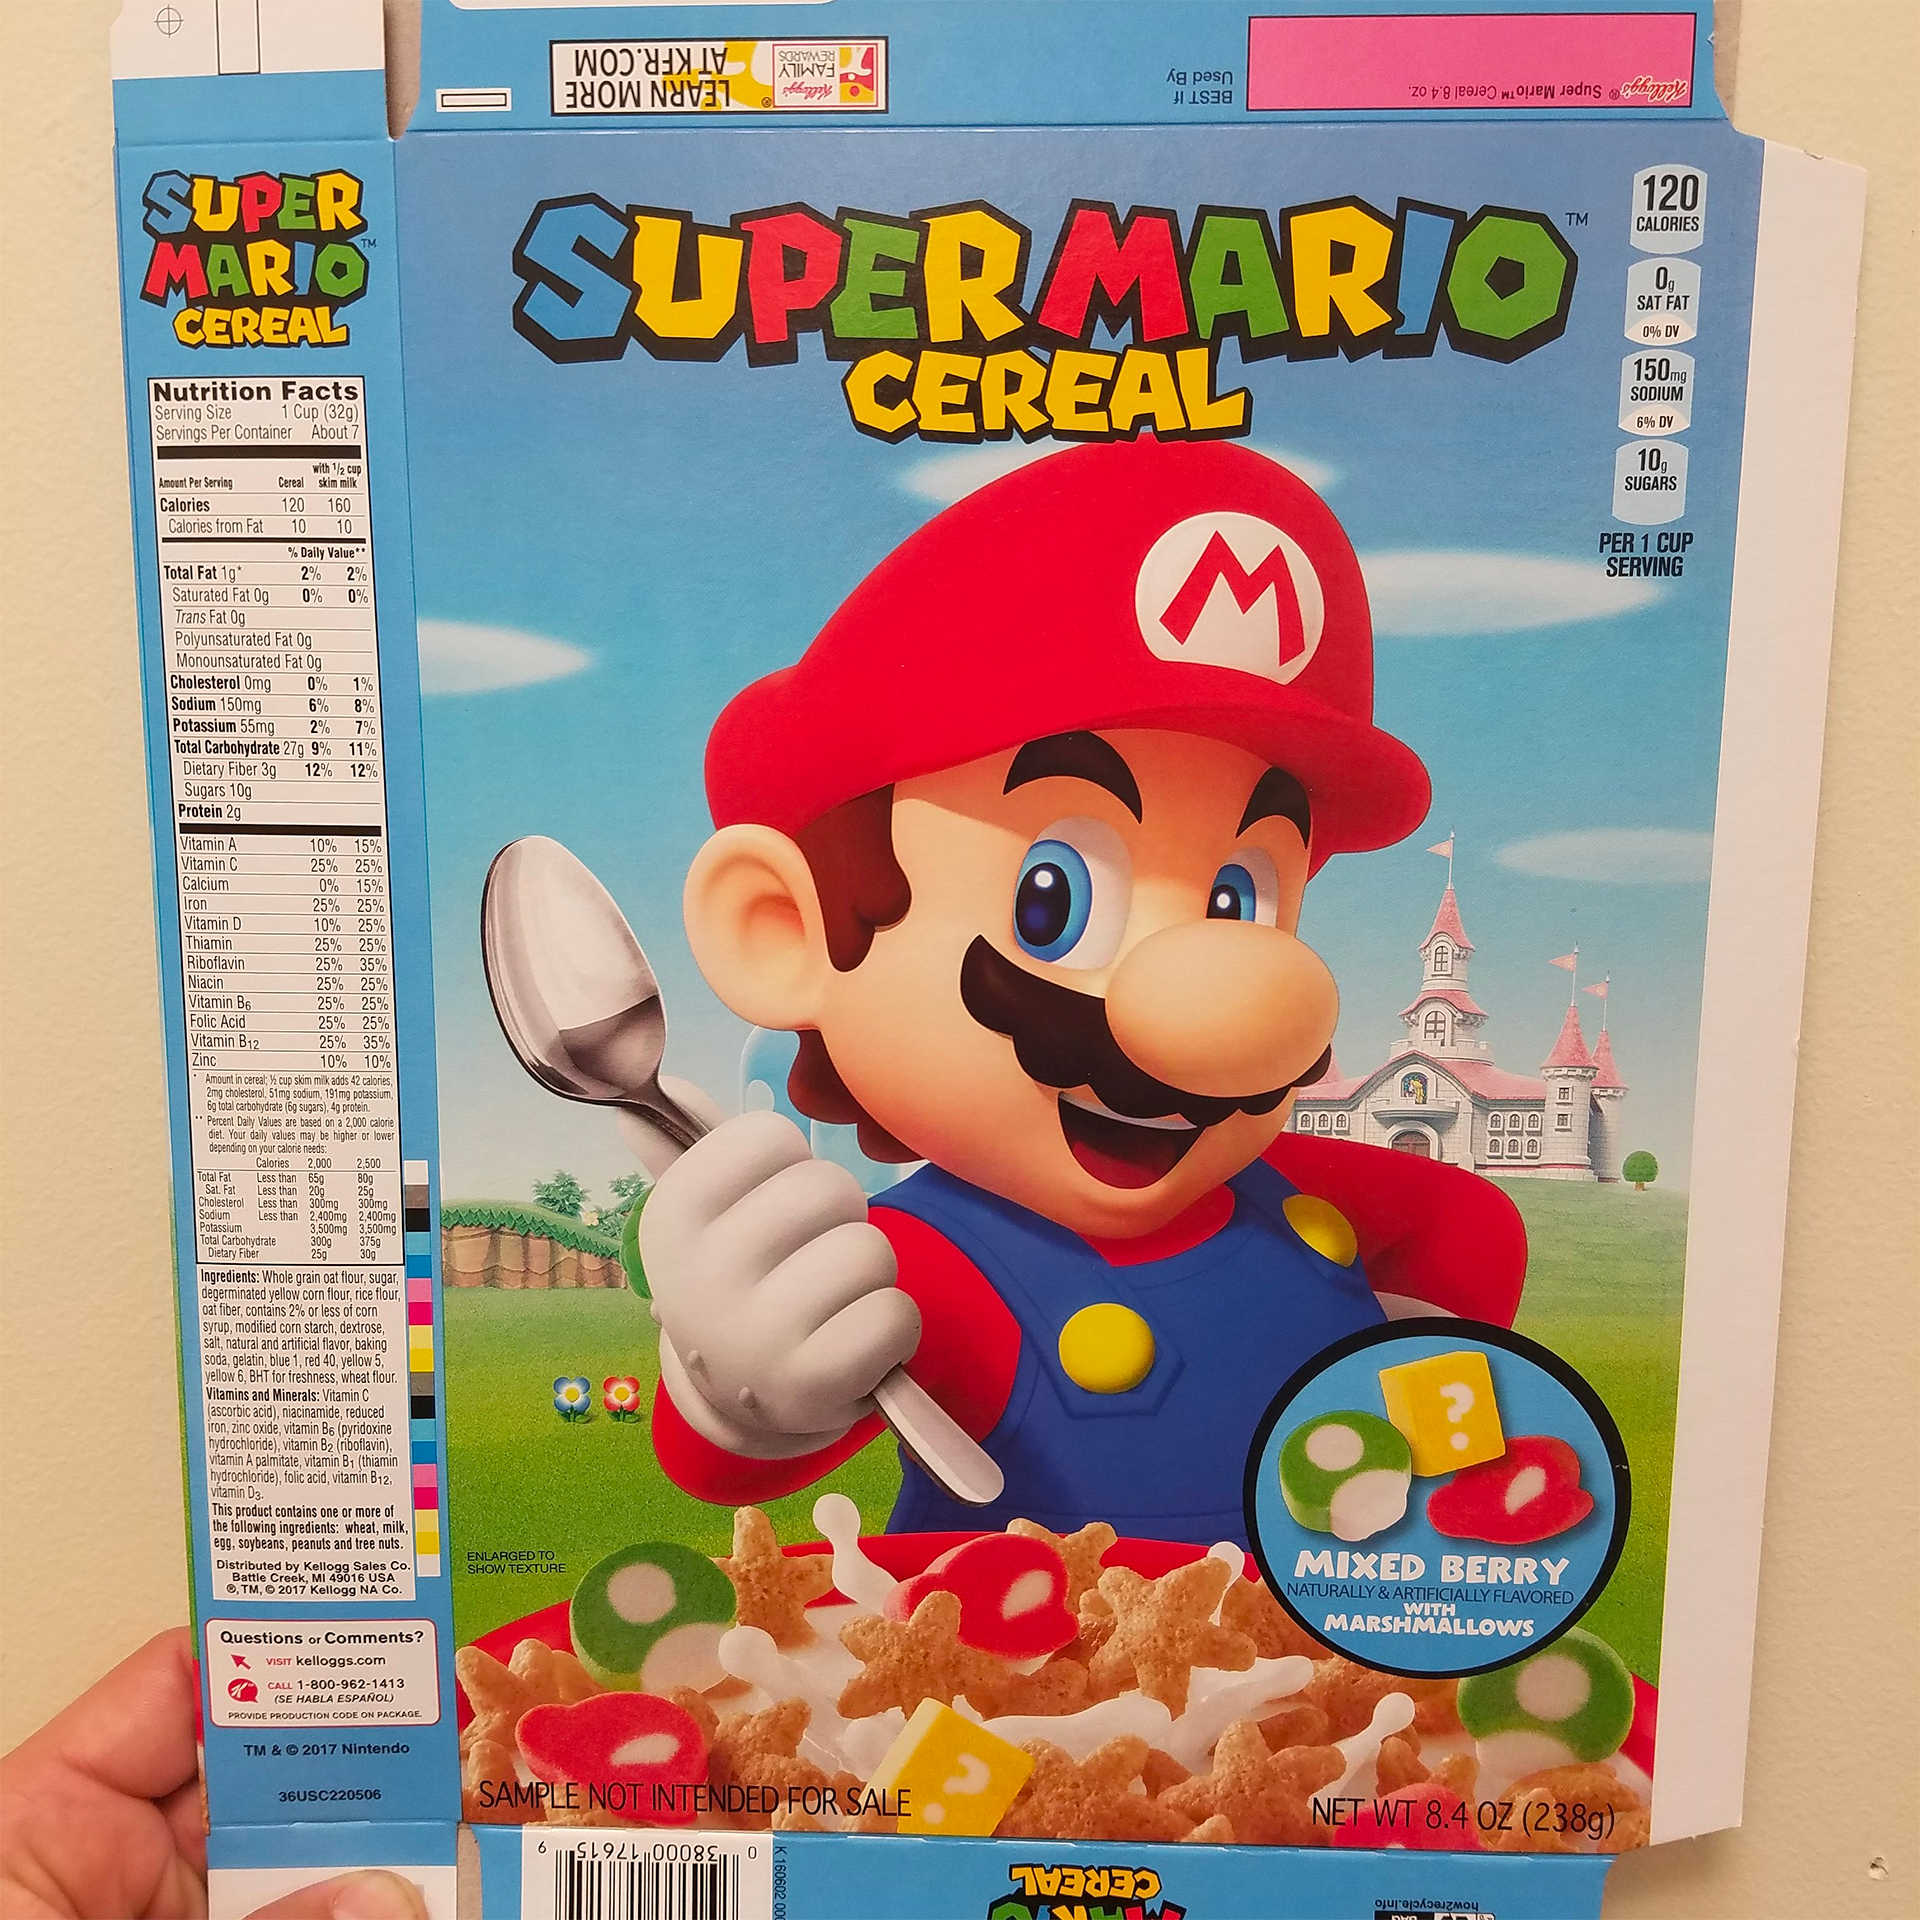 Amiibo-less Super Mario Cereal is Hitting Store Shelves | Cat with Monocle